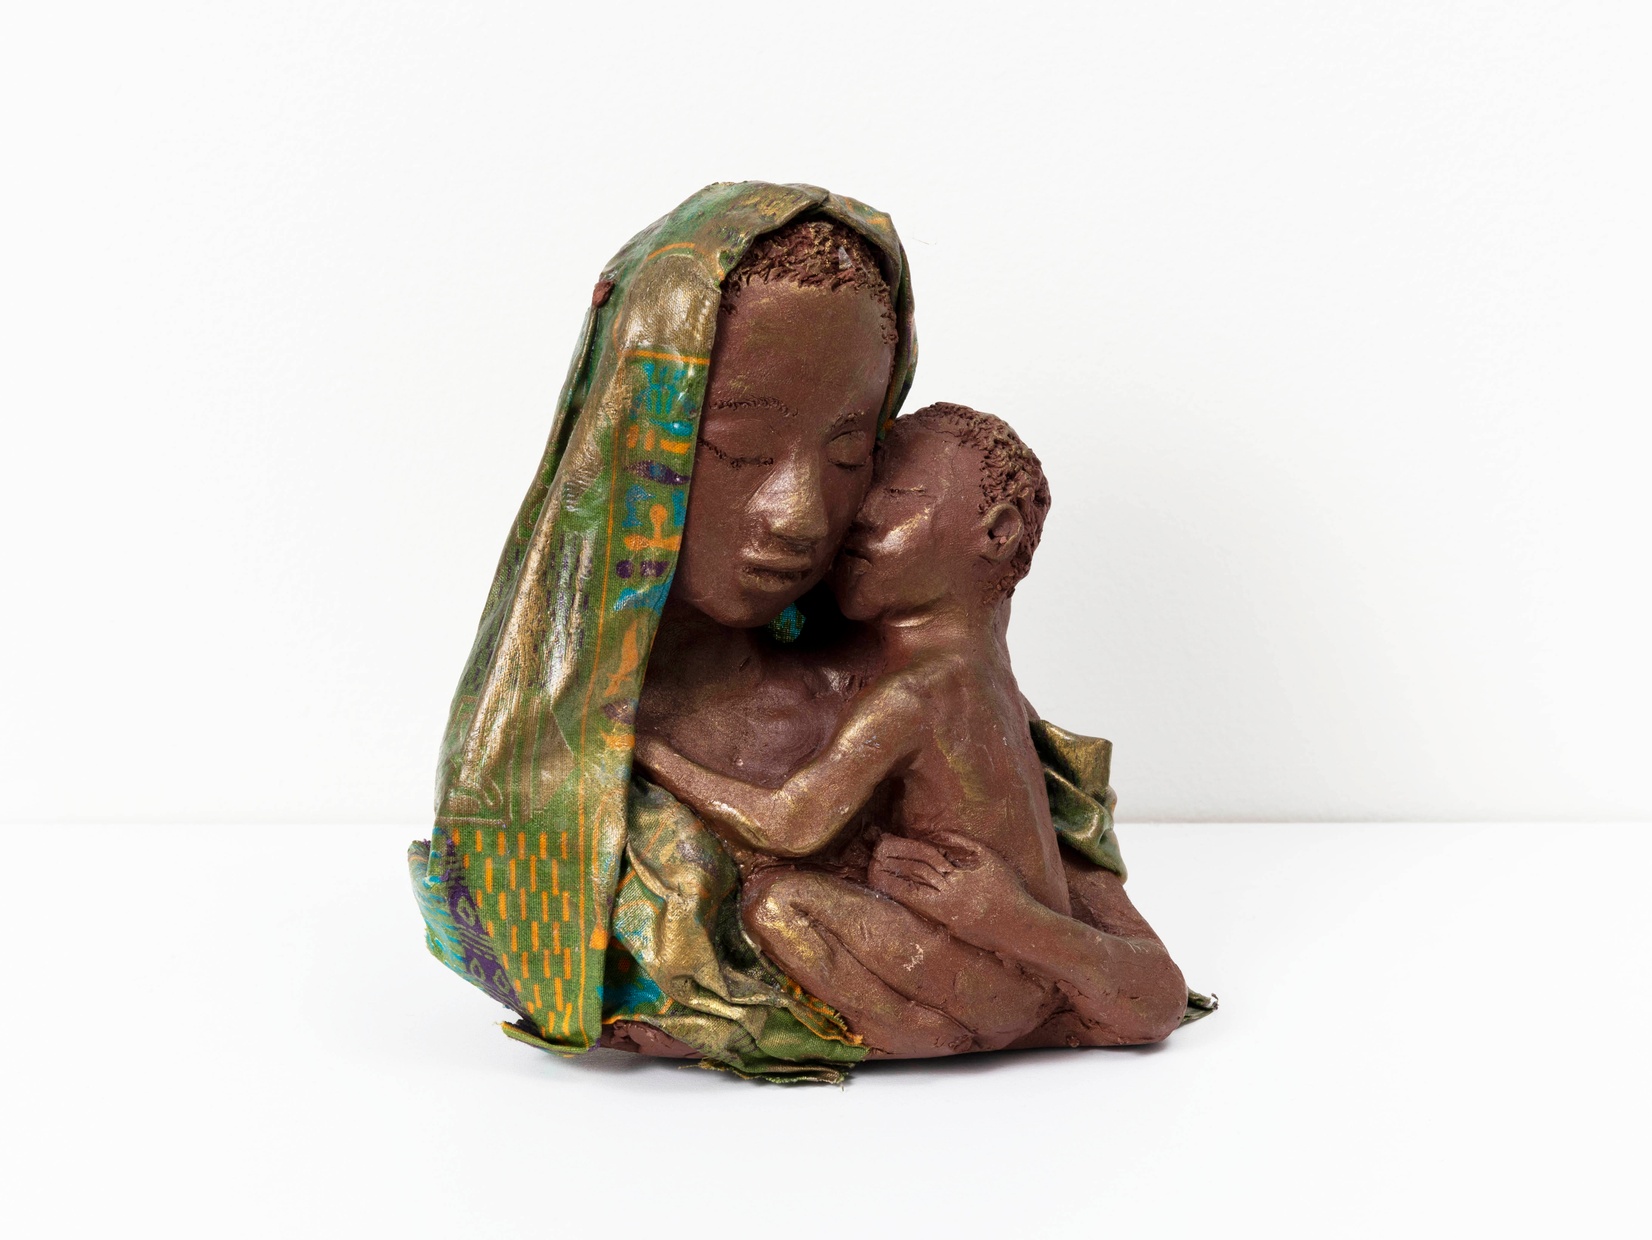 A dark clay bust of a woman wearing a green headscarf and holding a baby in her arms up to her cheek.